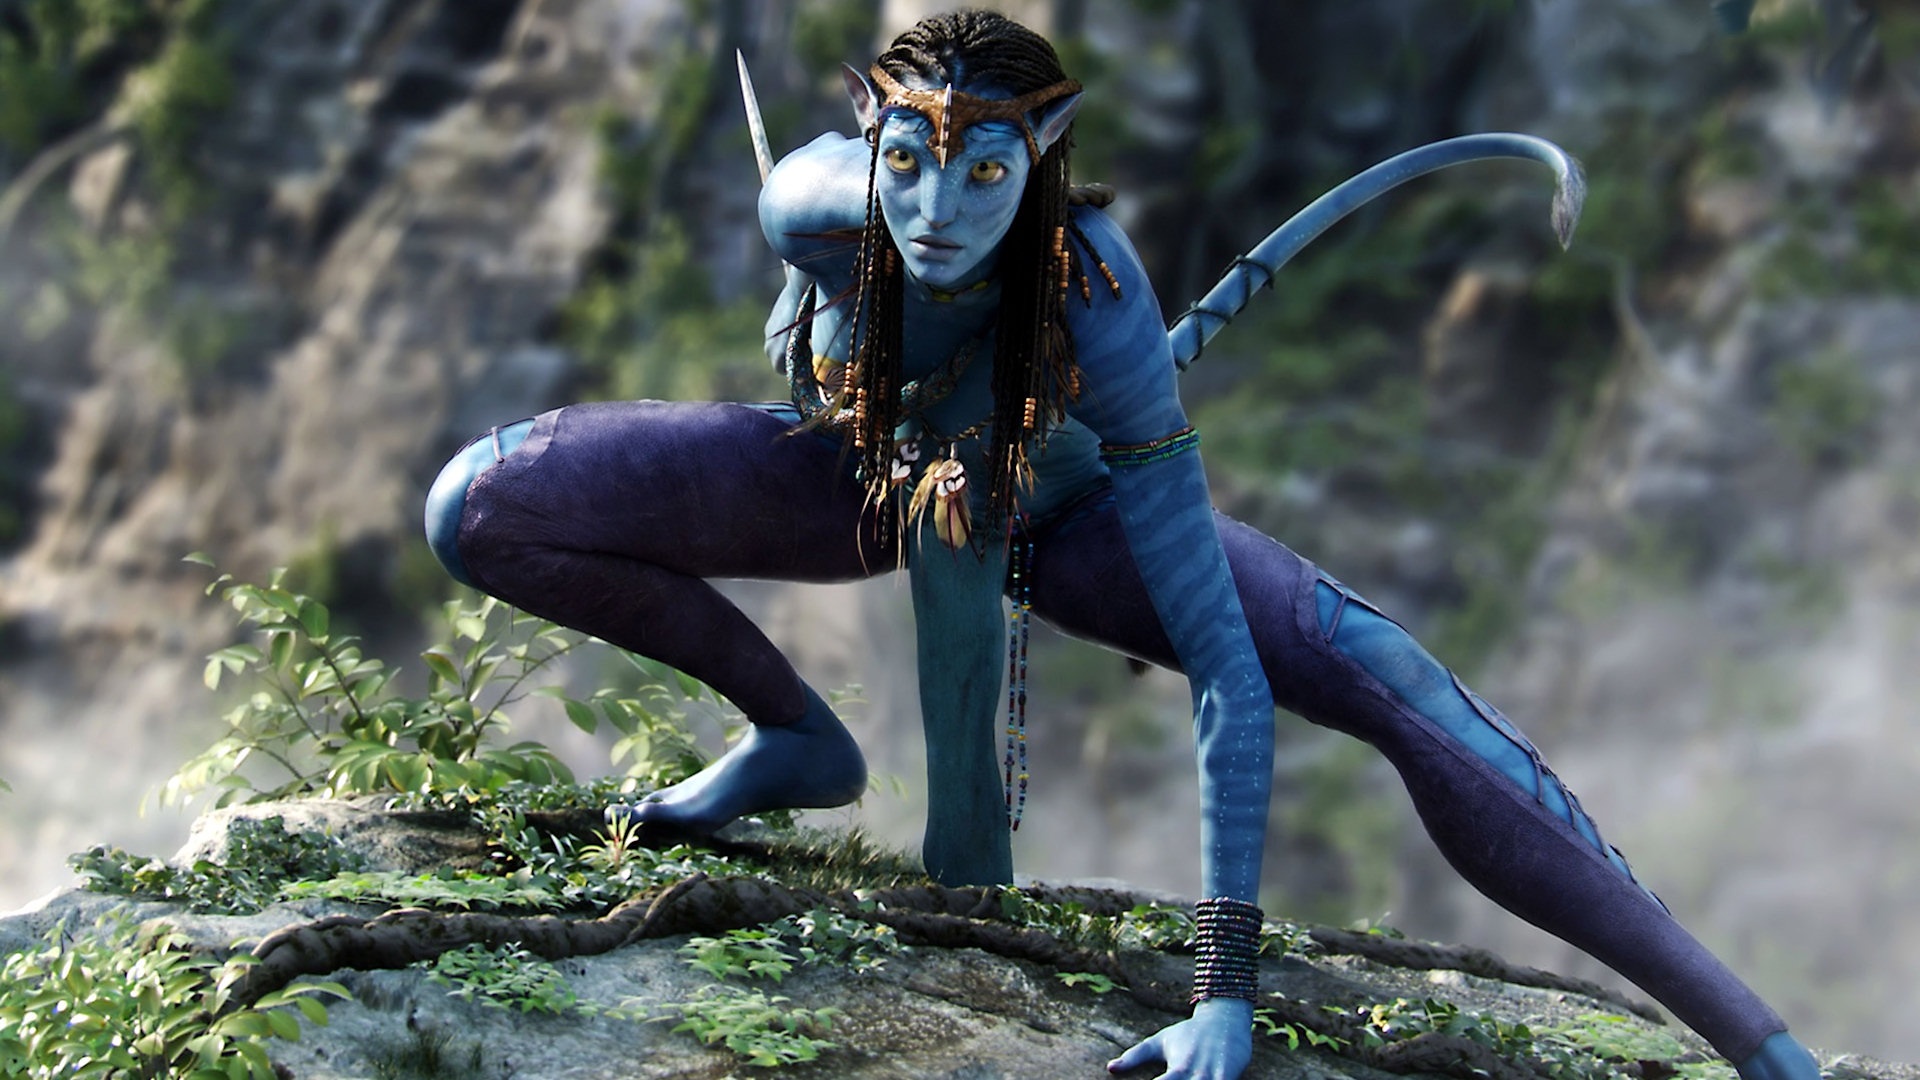 Download avatar s for ile phone free avatar hd pictures